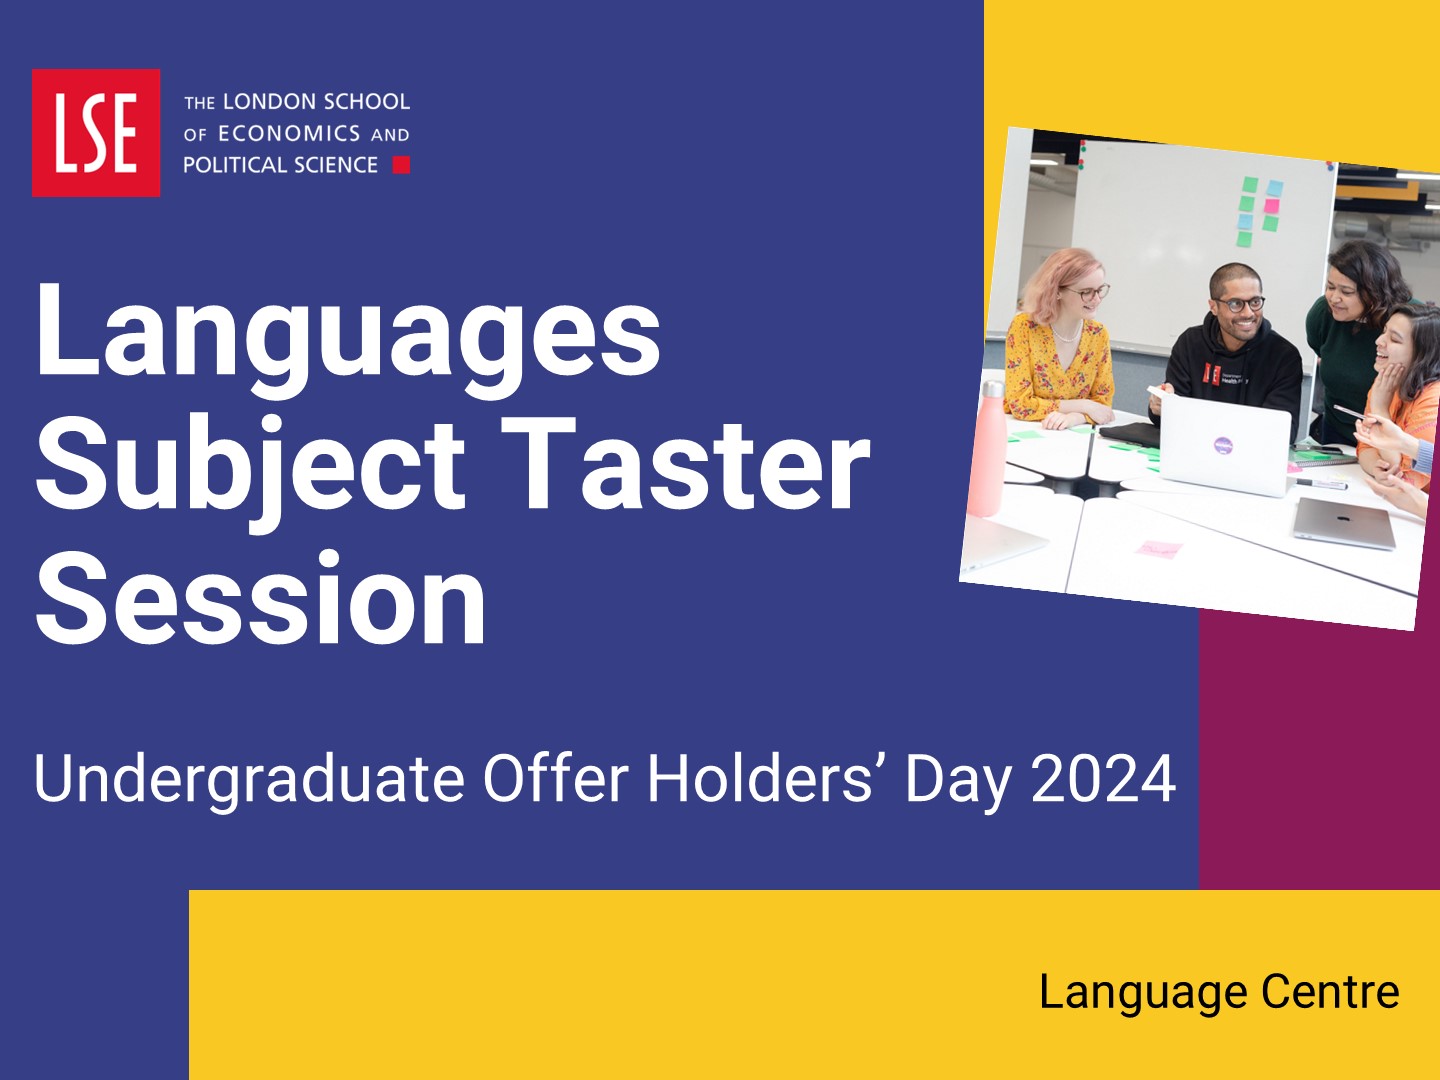 Watch the languages subject taster session